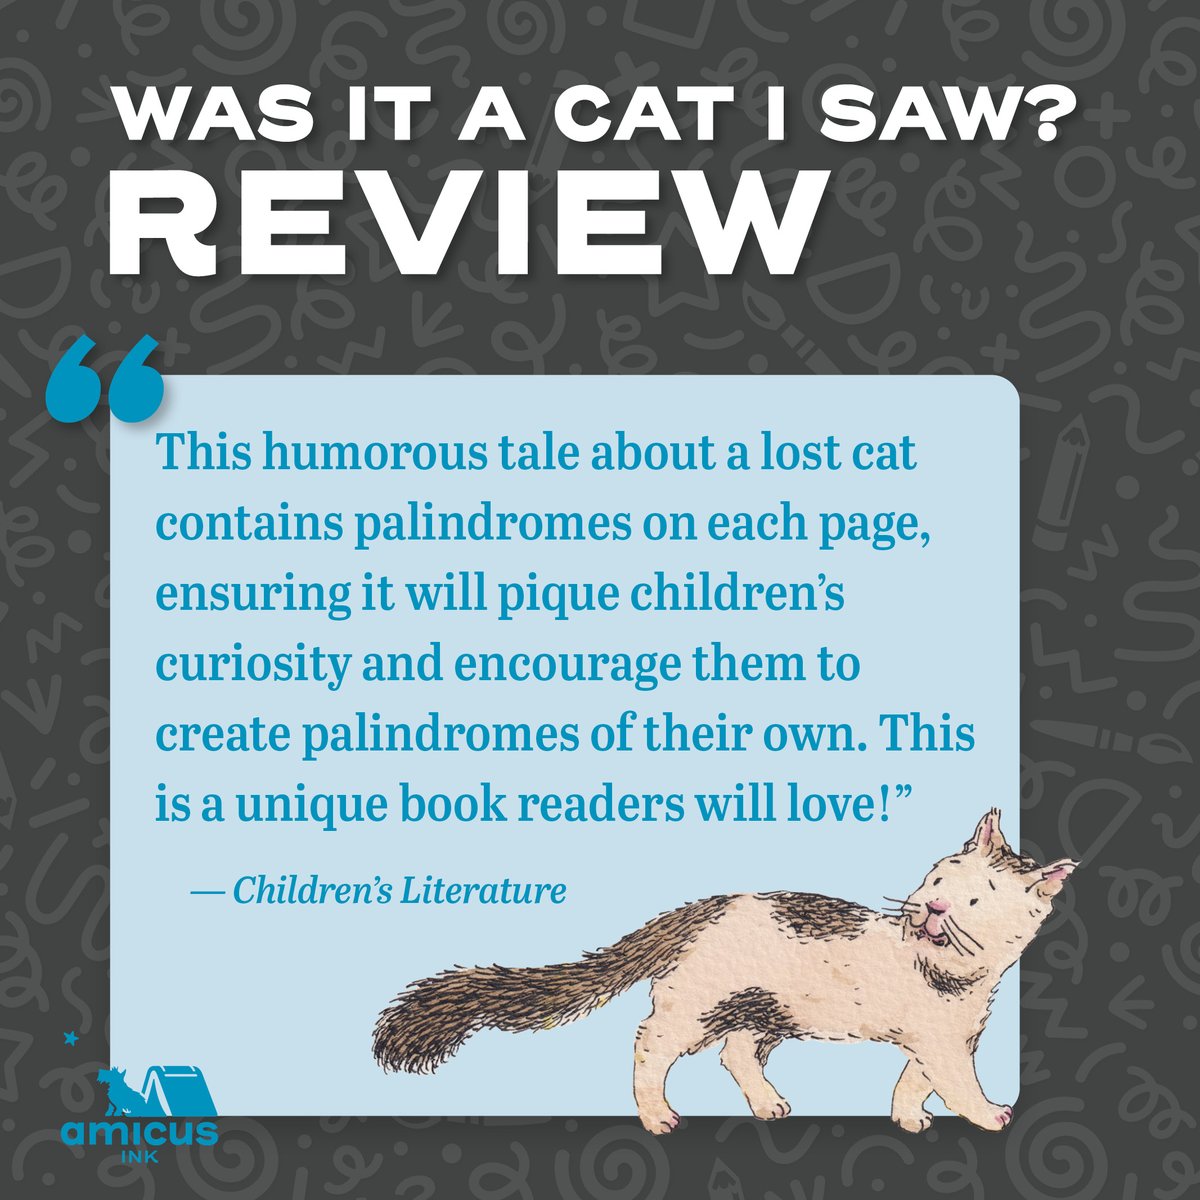 More praise for new Amicus Ink picture book Was It a Cat I Saw? Thank you to @CLreviews for the great review! amicuspublishing.us/products/was-i… #picturebook #newbook #debutpicturebooks #palindromes #bookreview #cats #makenewfriends #Amicus